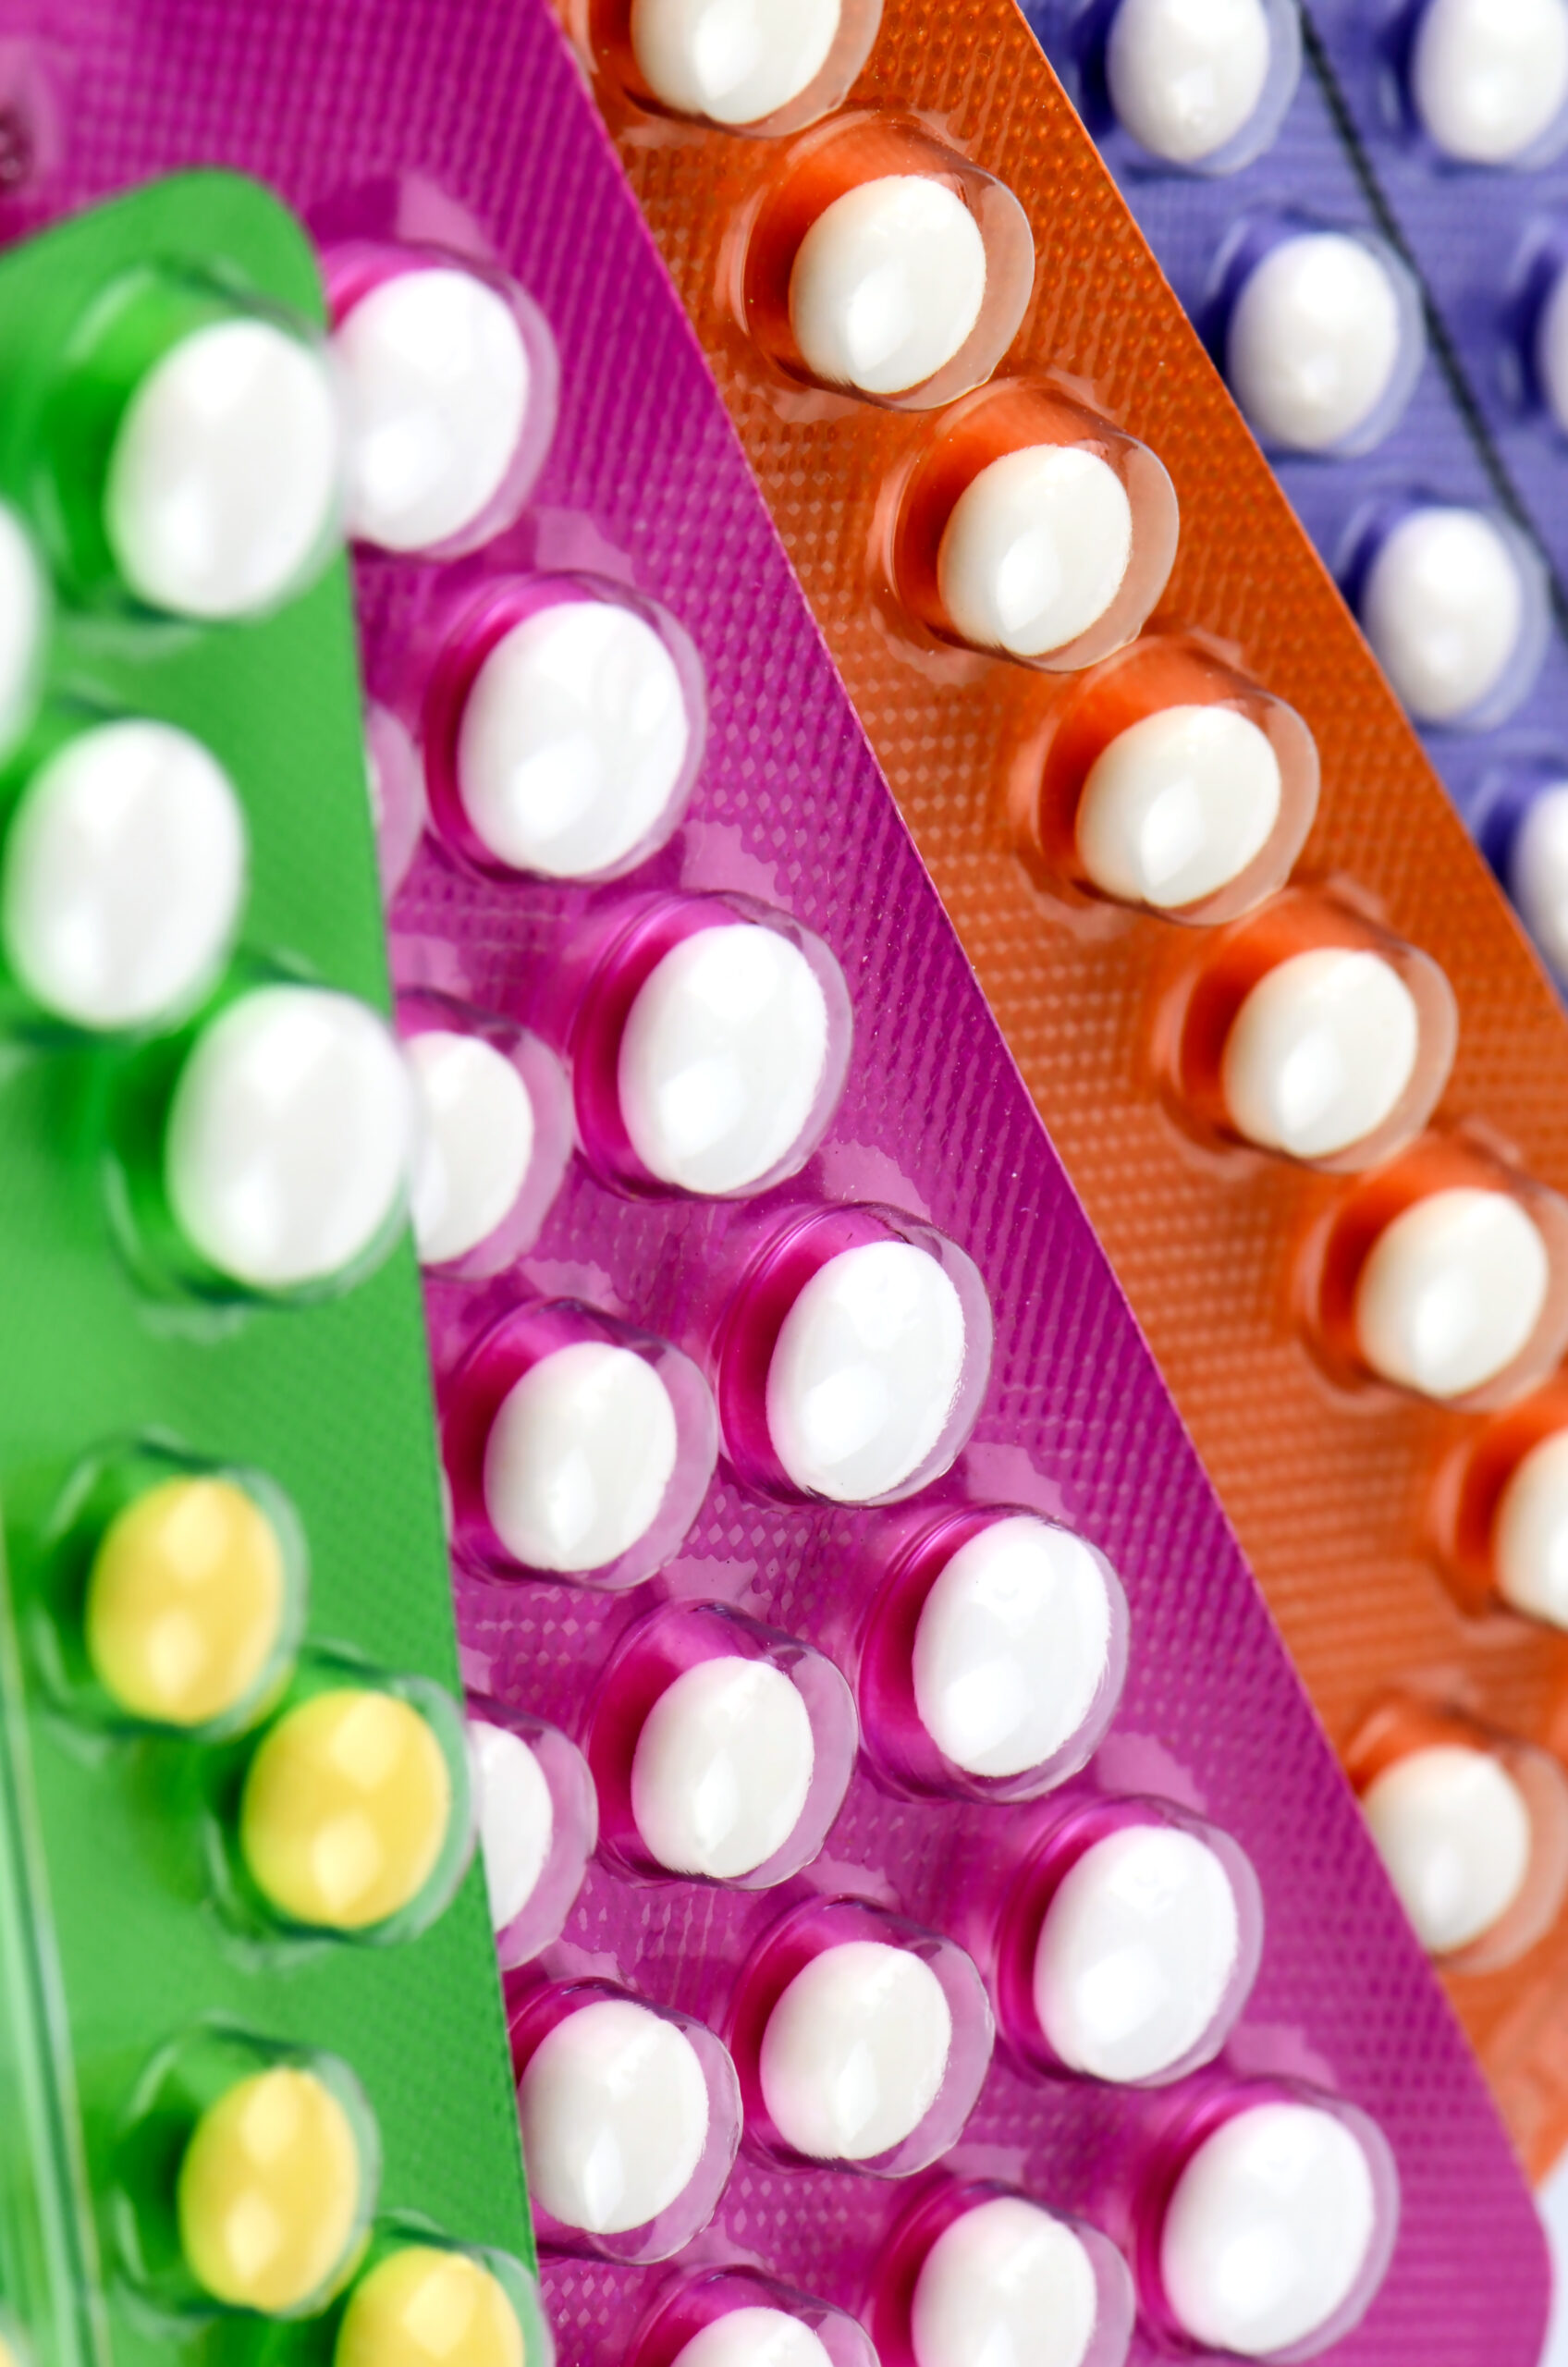 Negative Side Effects Of Birth Control Pill